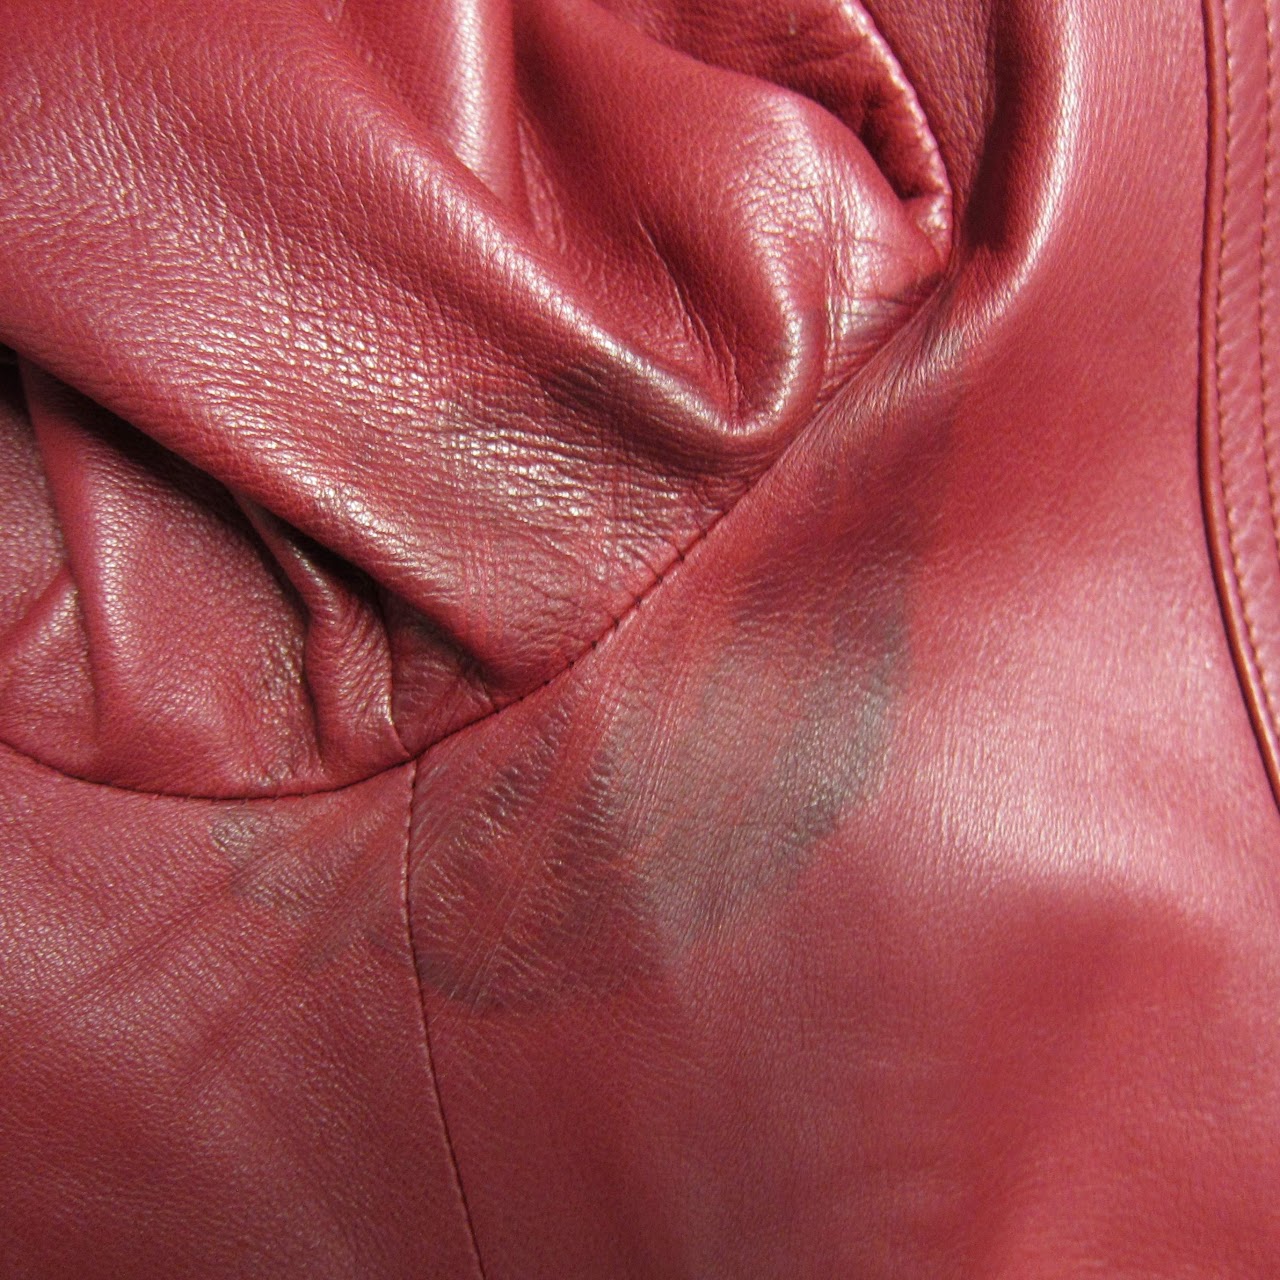 Gucci Red Leather Jacket